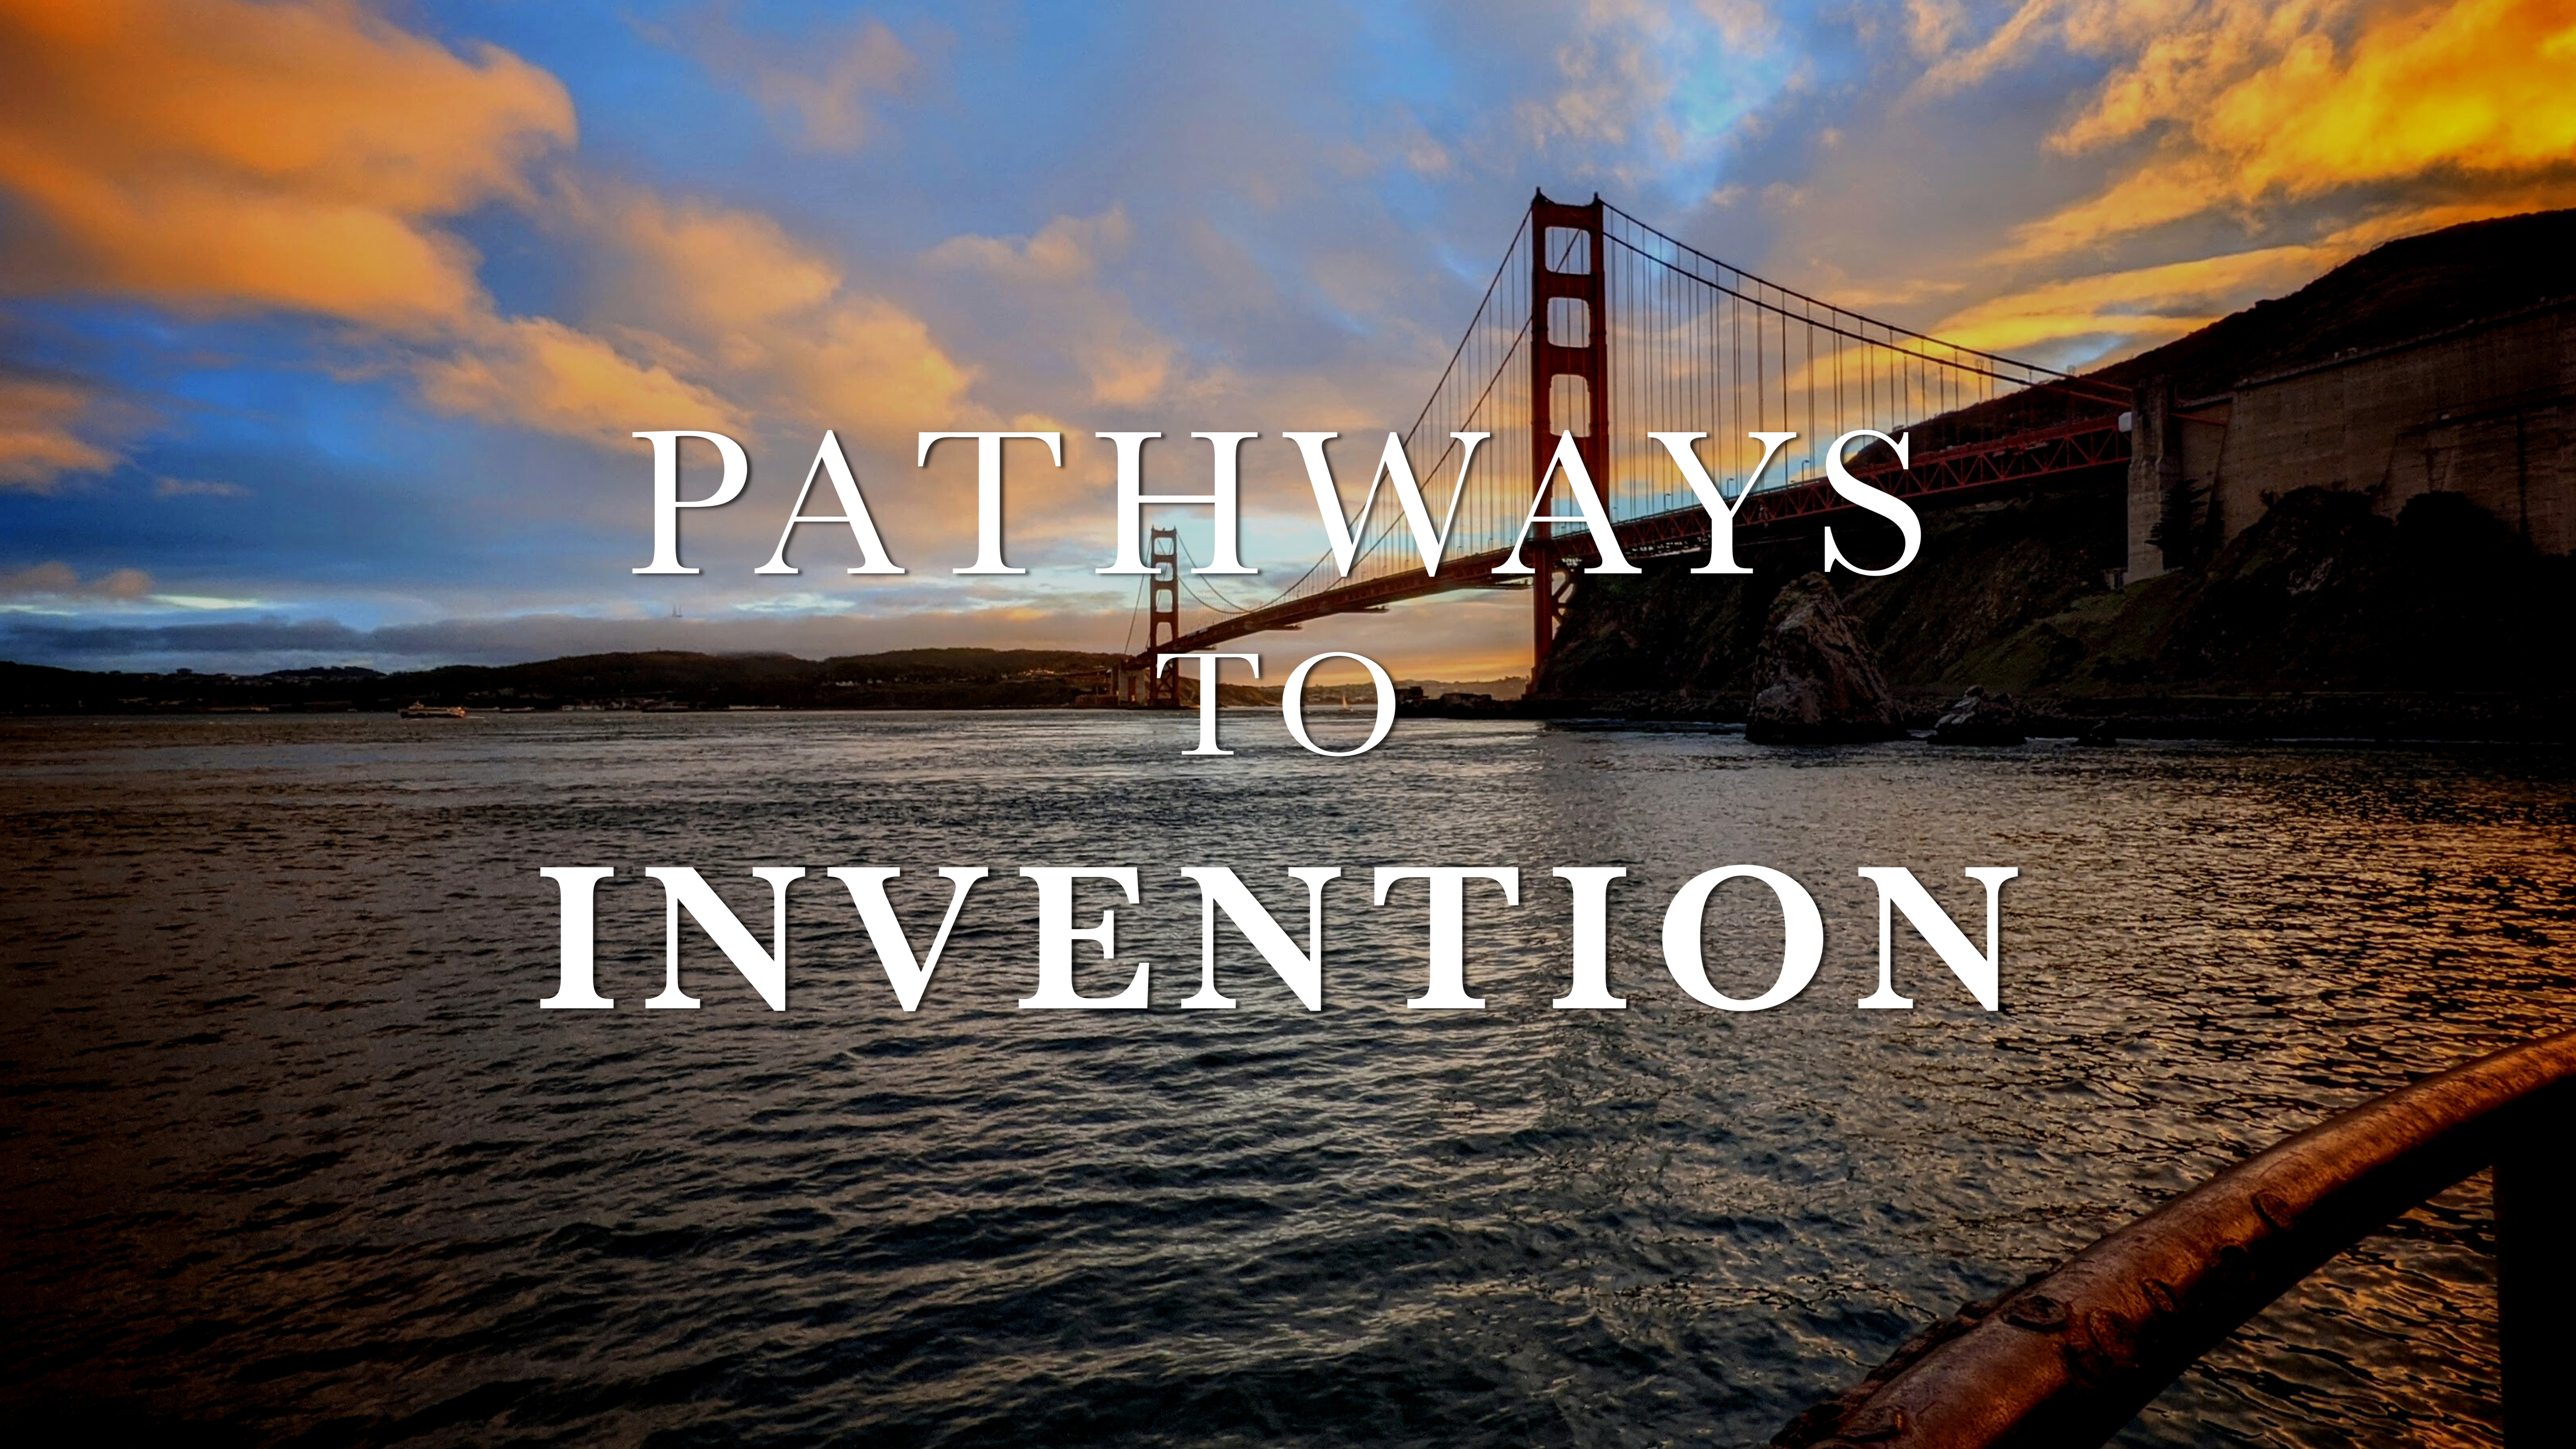 Check out Pathways to Invention airing on a public television station near you!